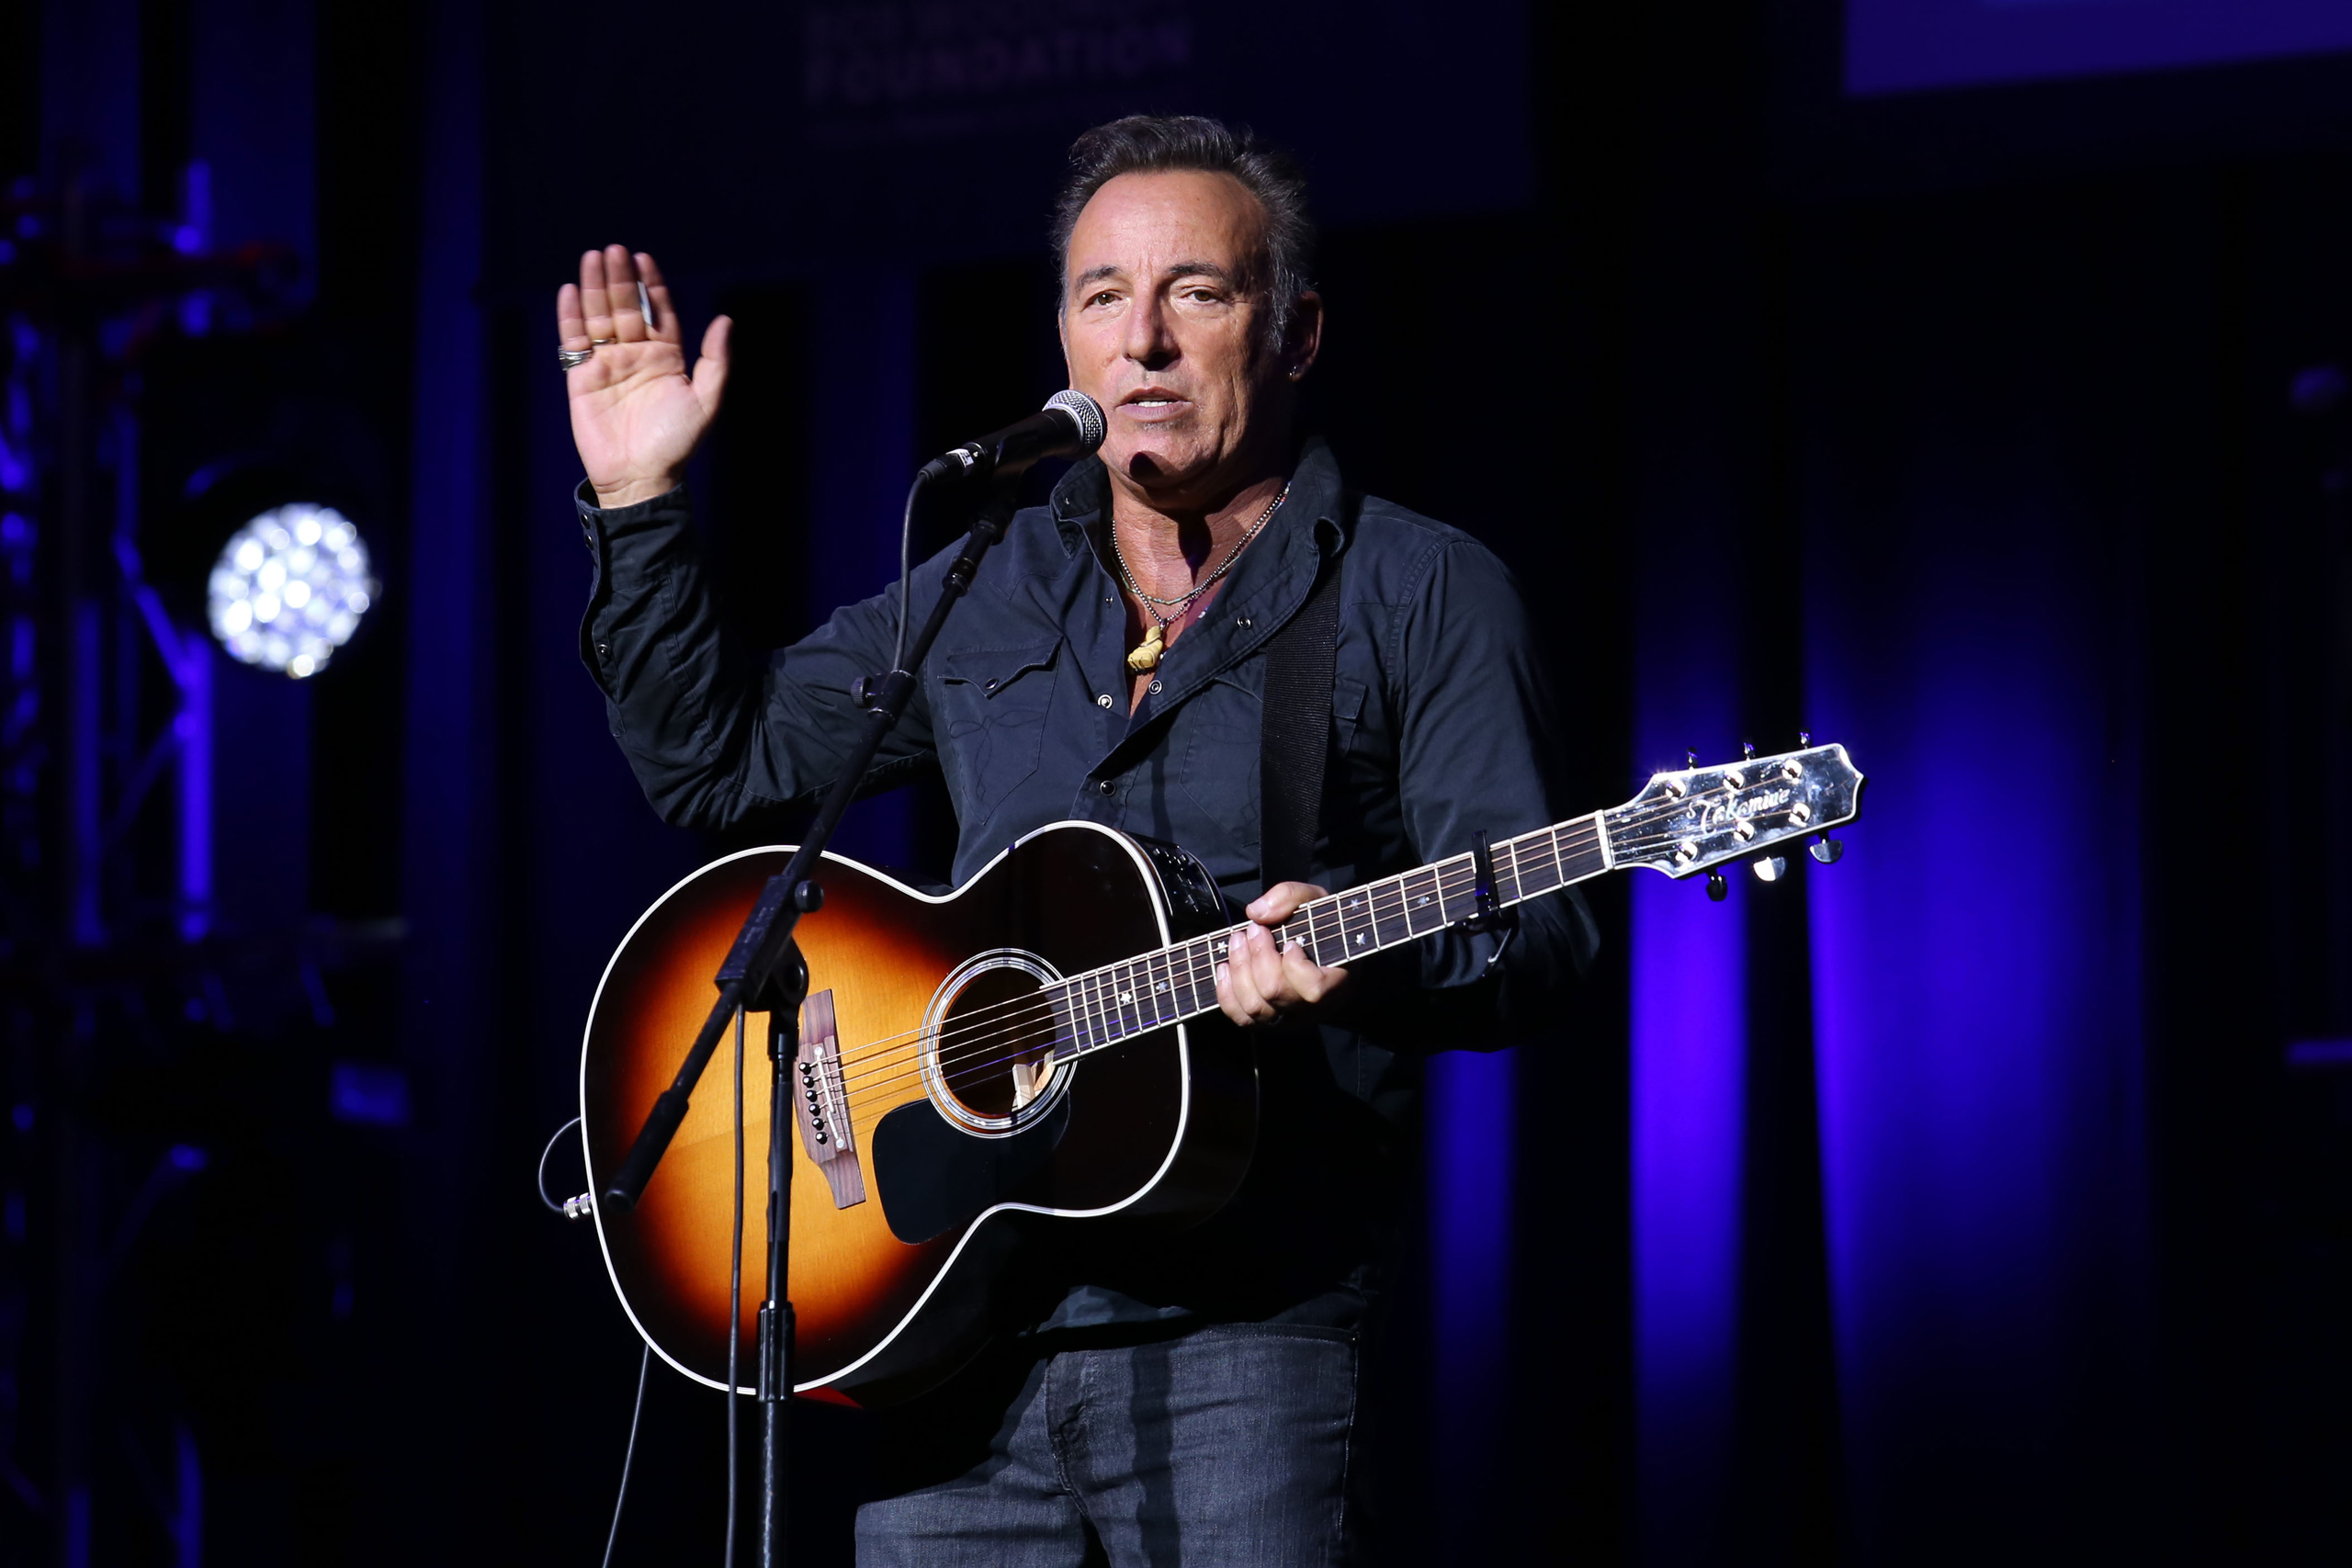 Bruce Springsteen performs at the 9th Annual Stand Up For Heroes event at Madison Square Garden in New York on Nov. 10, 2015. (Greg Allen—Invision/AP)